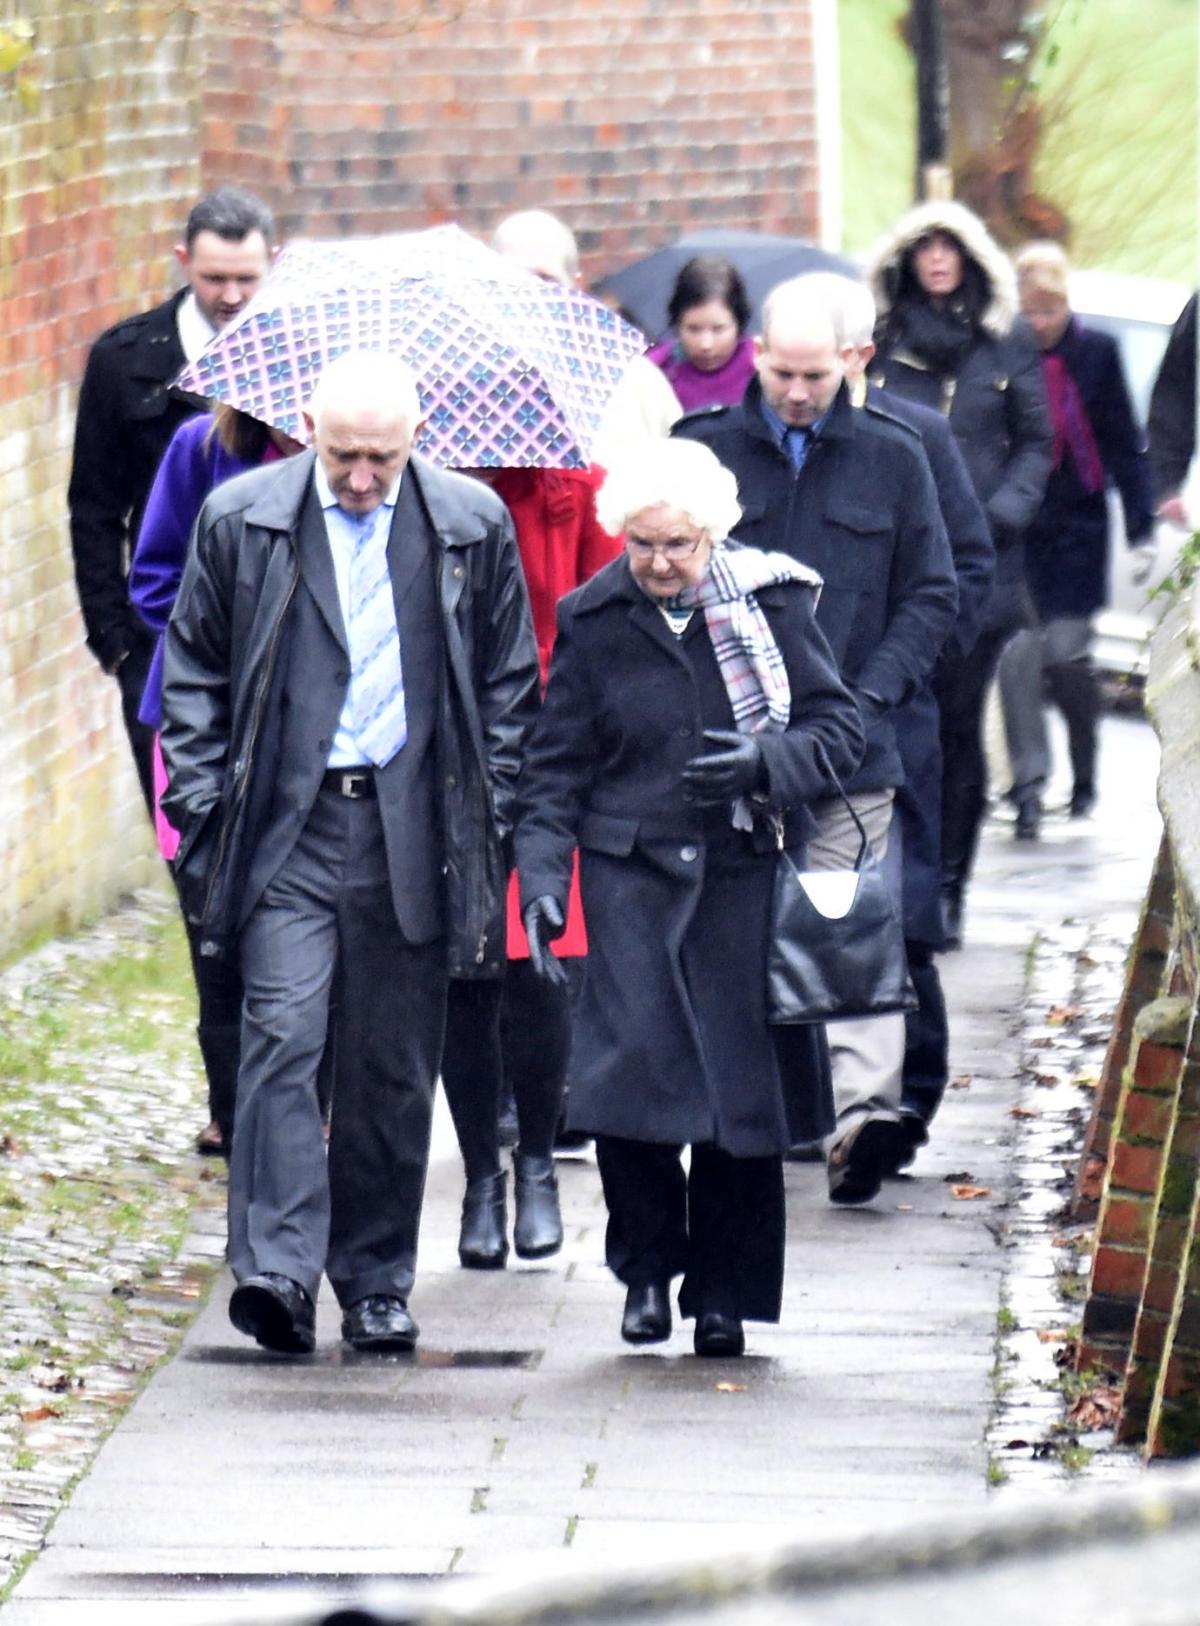 Relatives and friends arrive at the memorial service for Max Pearson at St Mary's Church, Marlborough, today. Pictures by Diane Vose